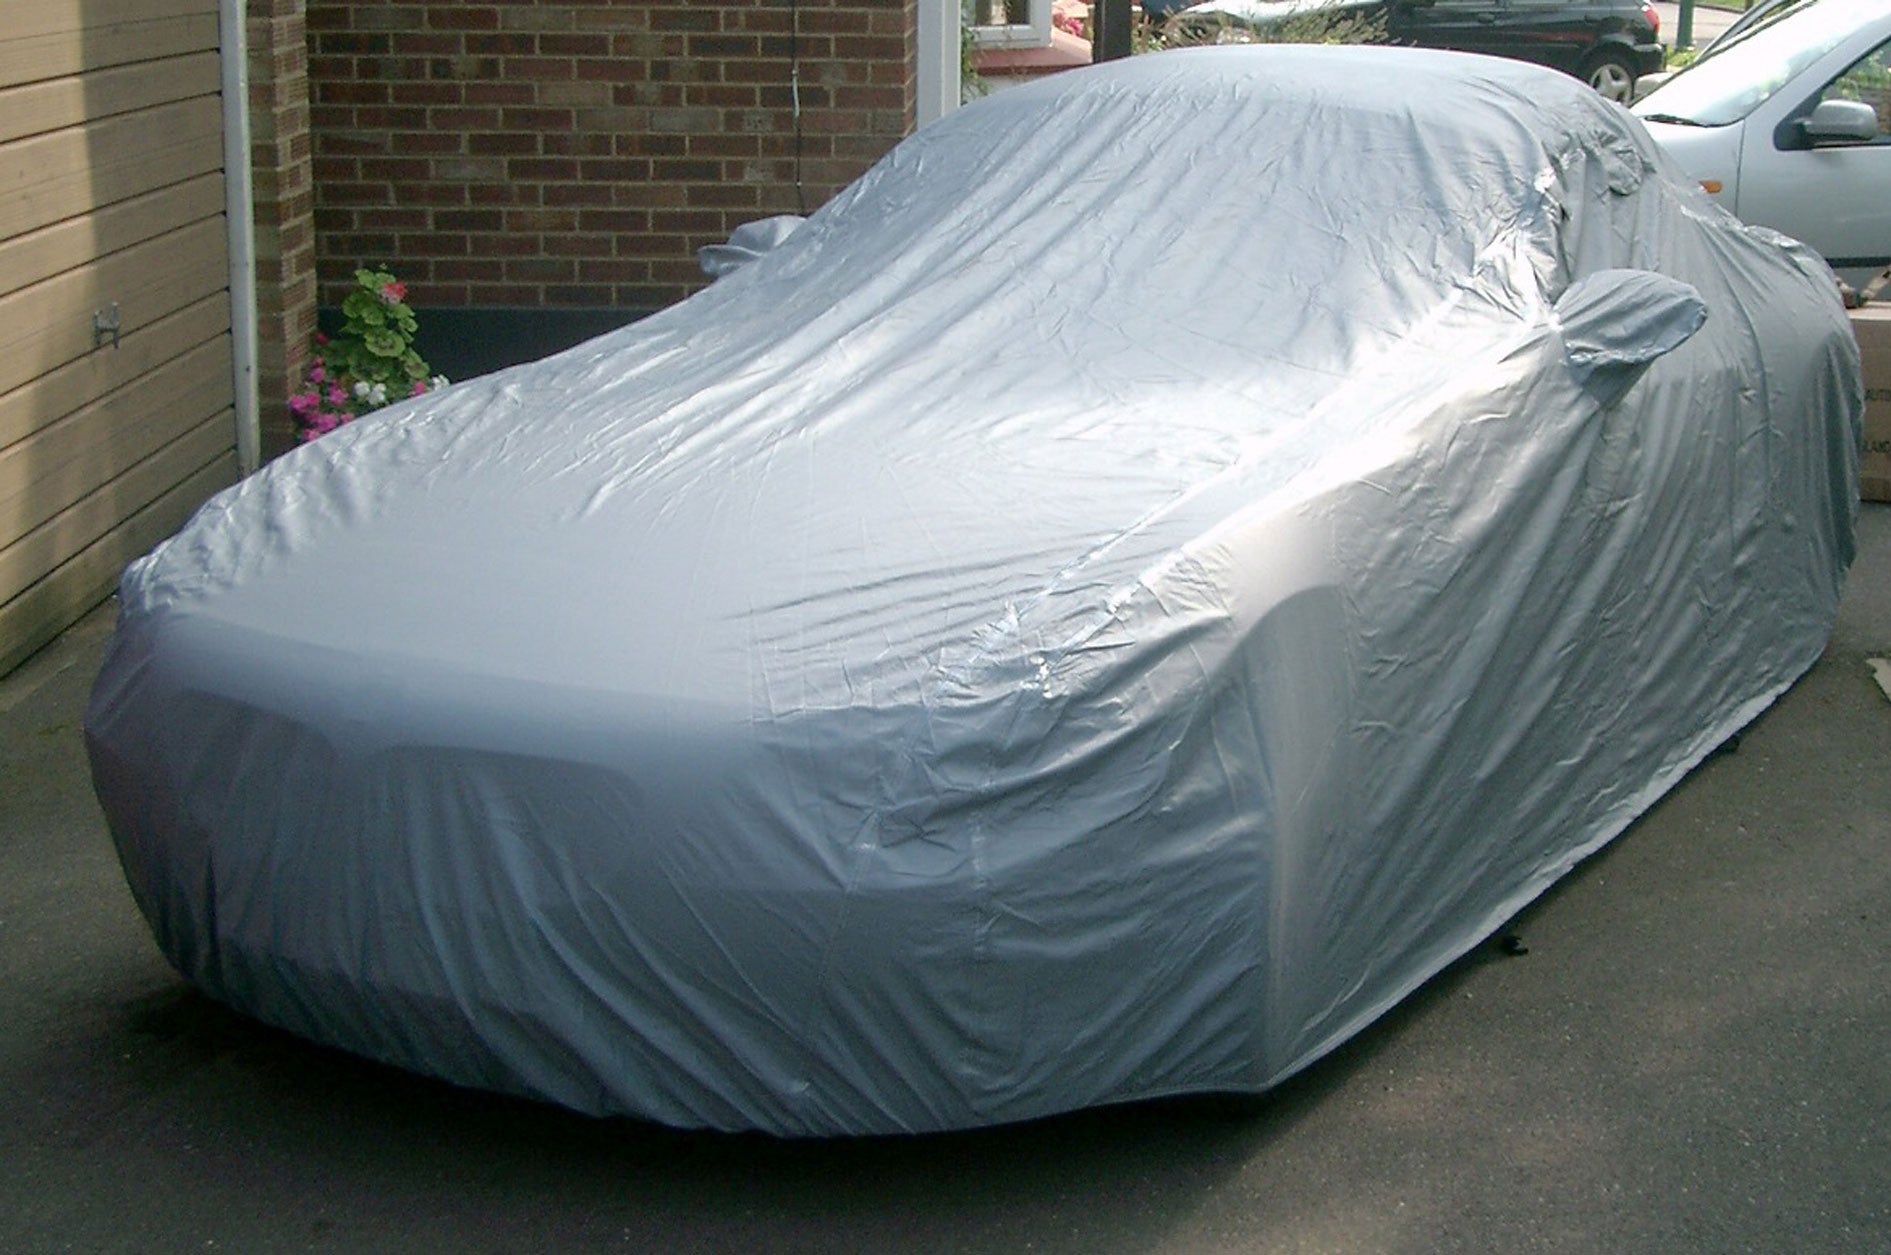 Monsoon outdoor waterproof winter car covers for FIAT - Storm Car Covers